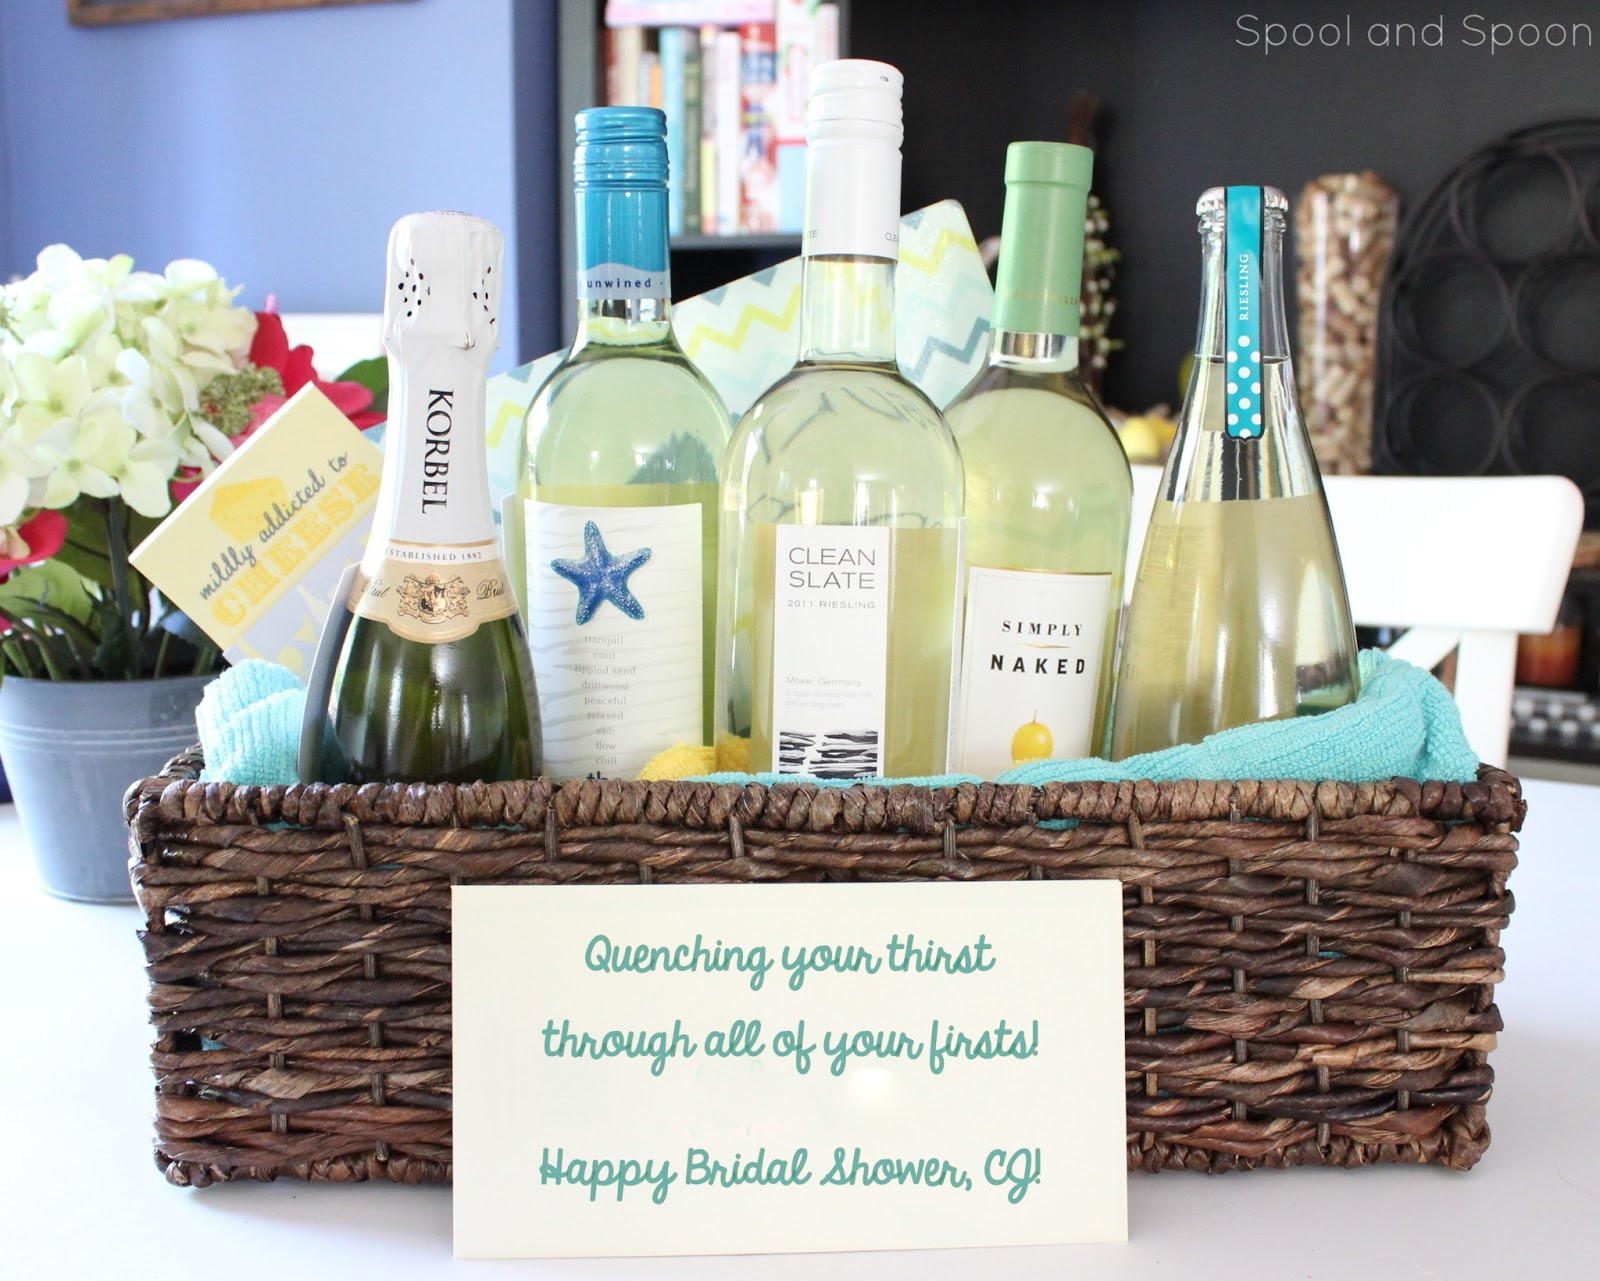 Ideas For Wine Gift Baskets
 Spool and Spoon "All of Your Firsts" Wine Gift Basket